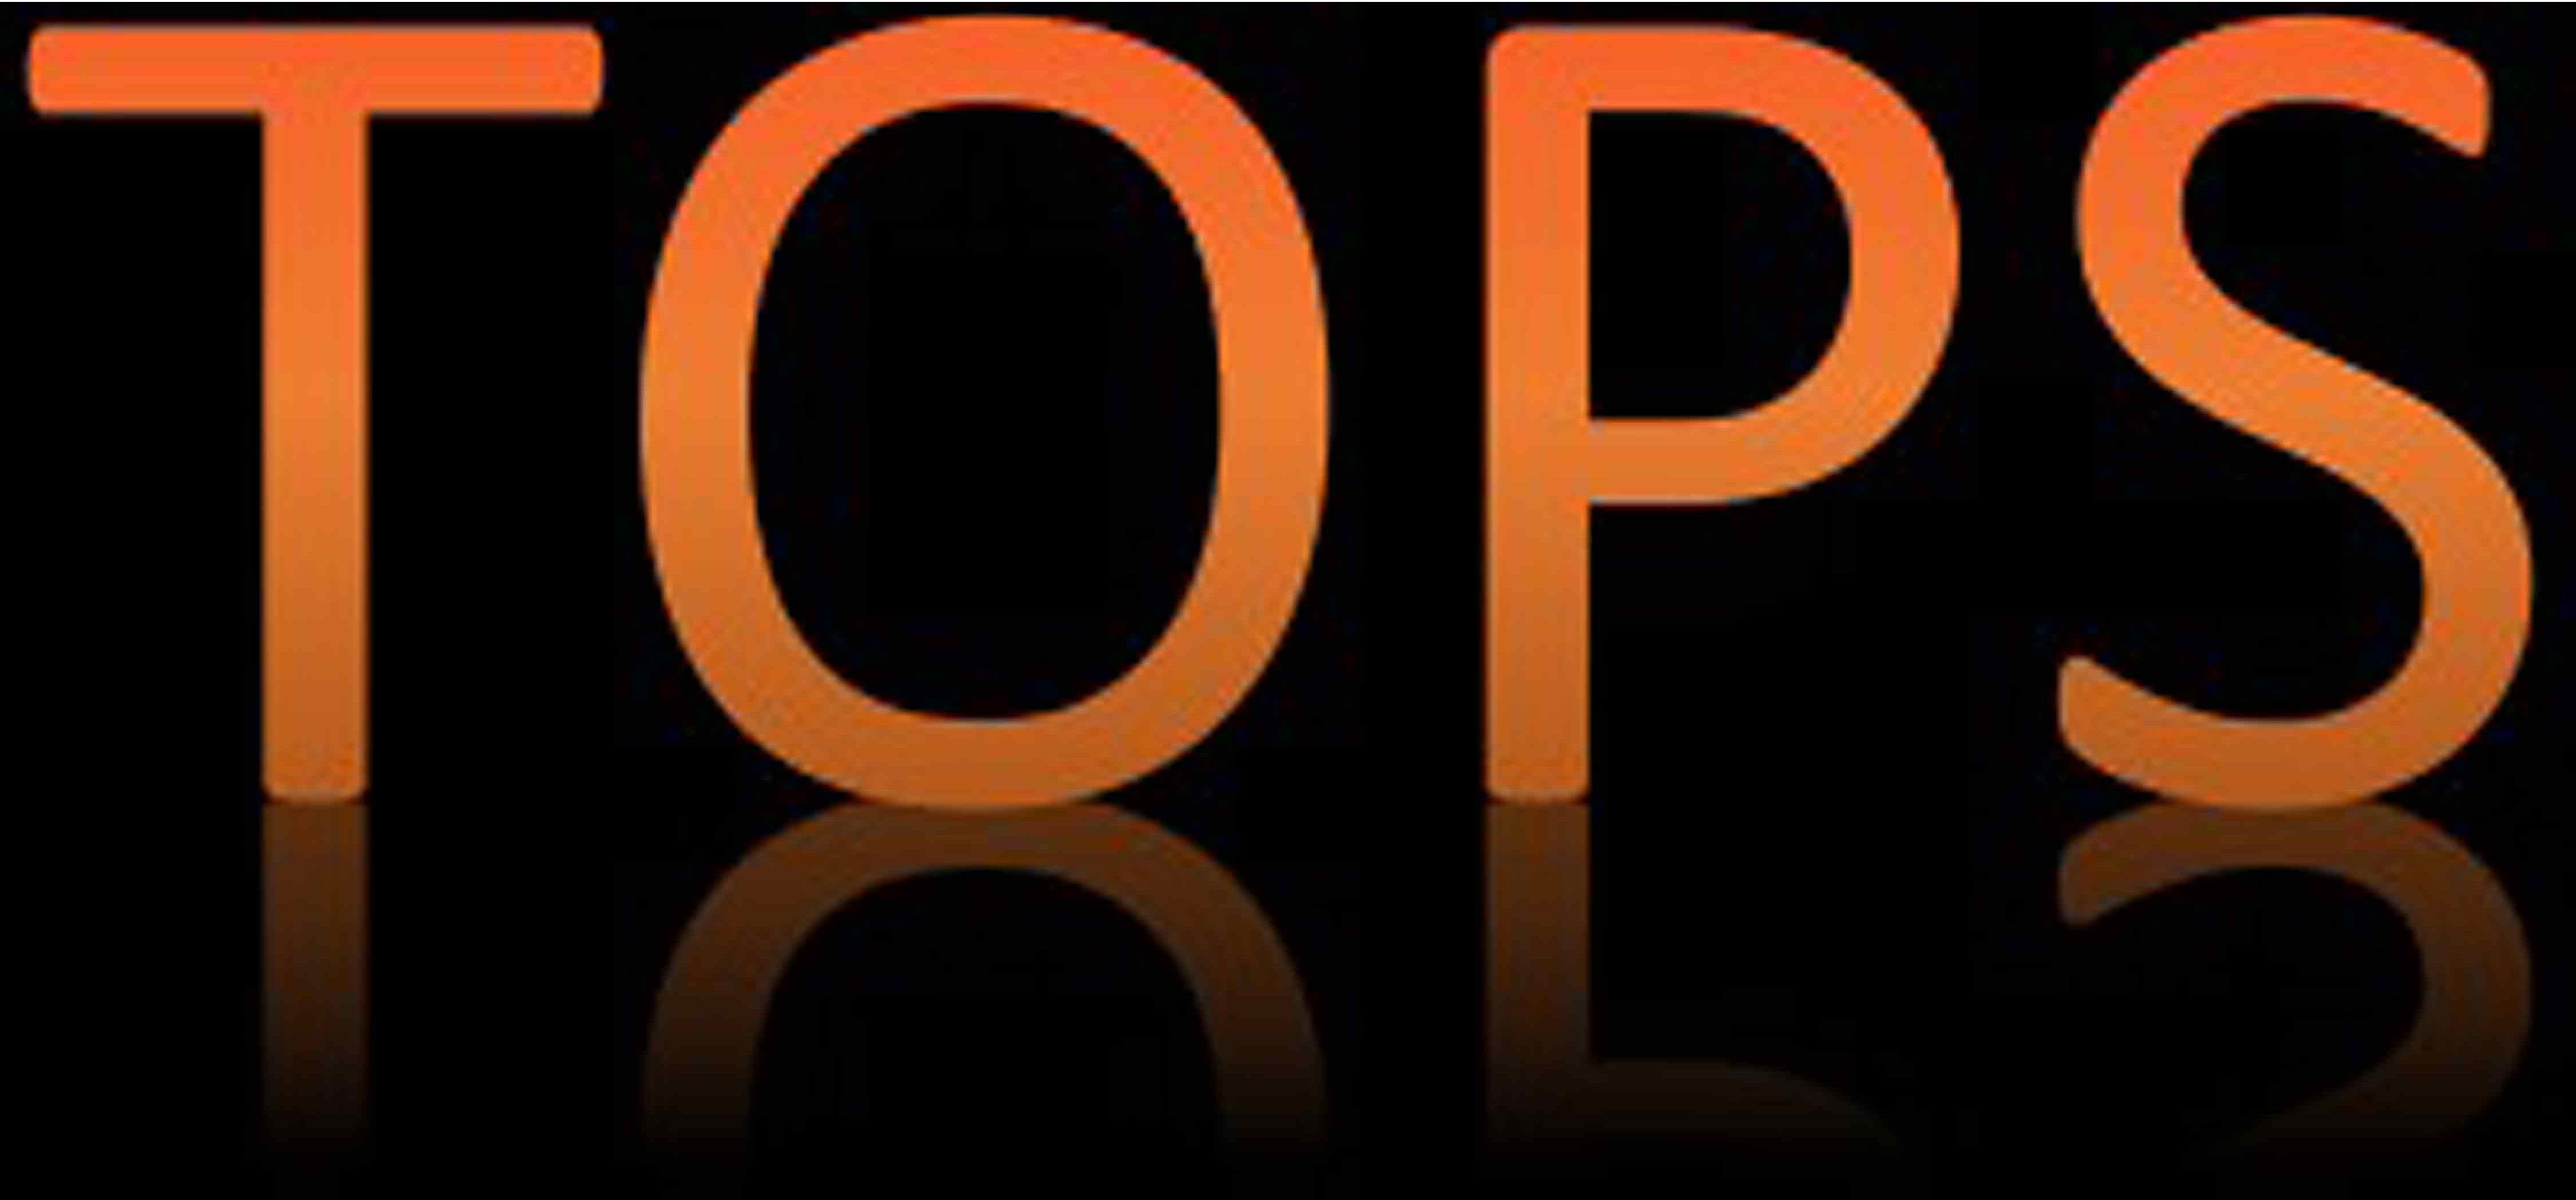 TOPS orange text on a black background